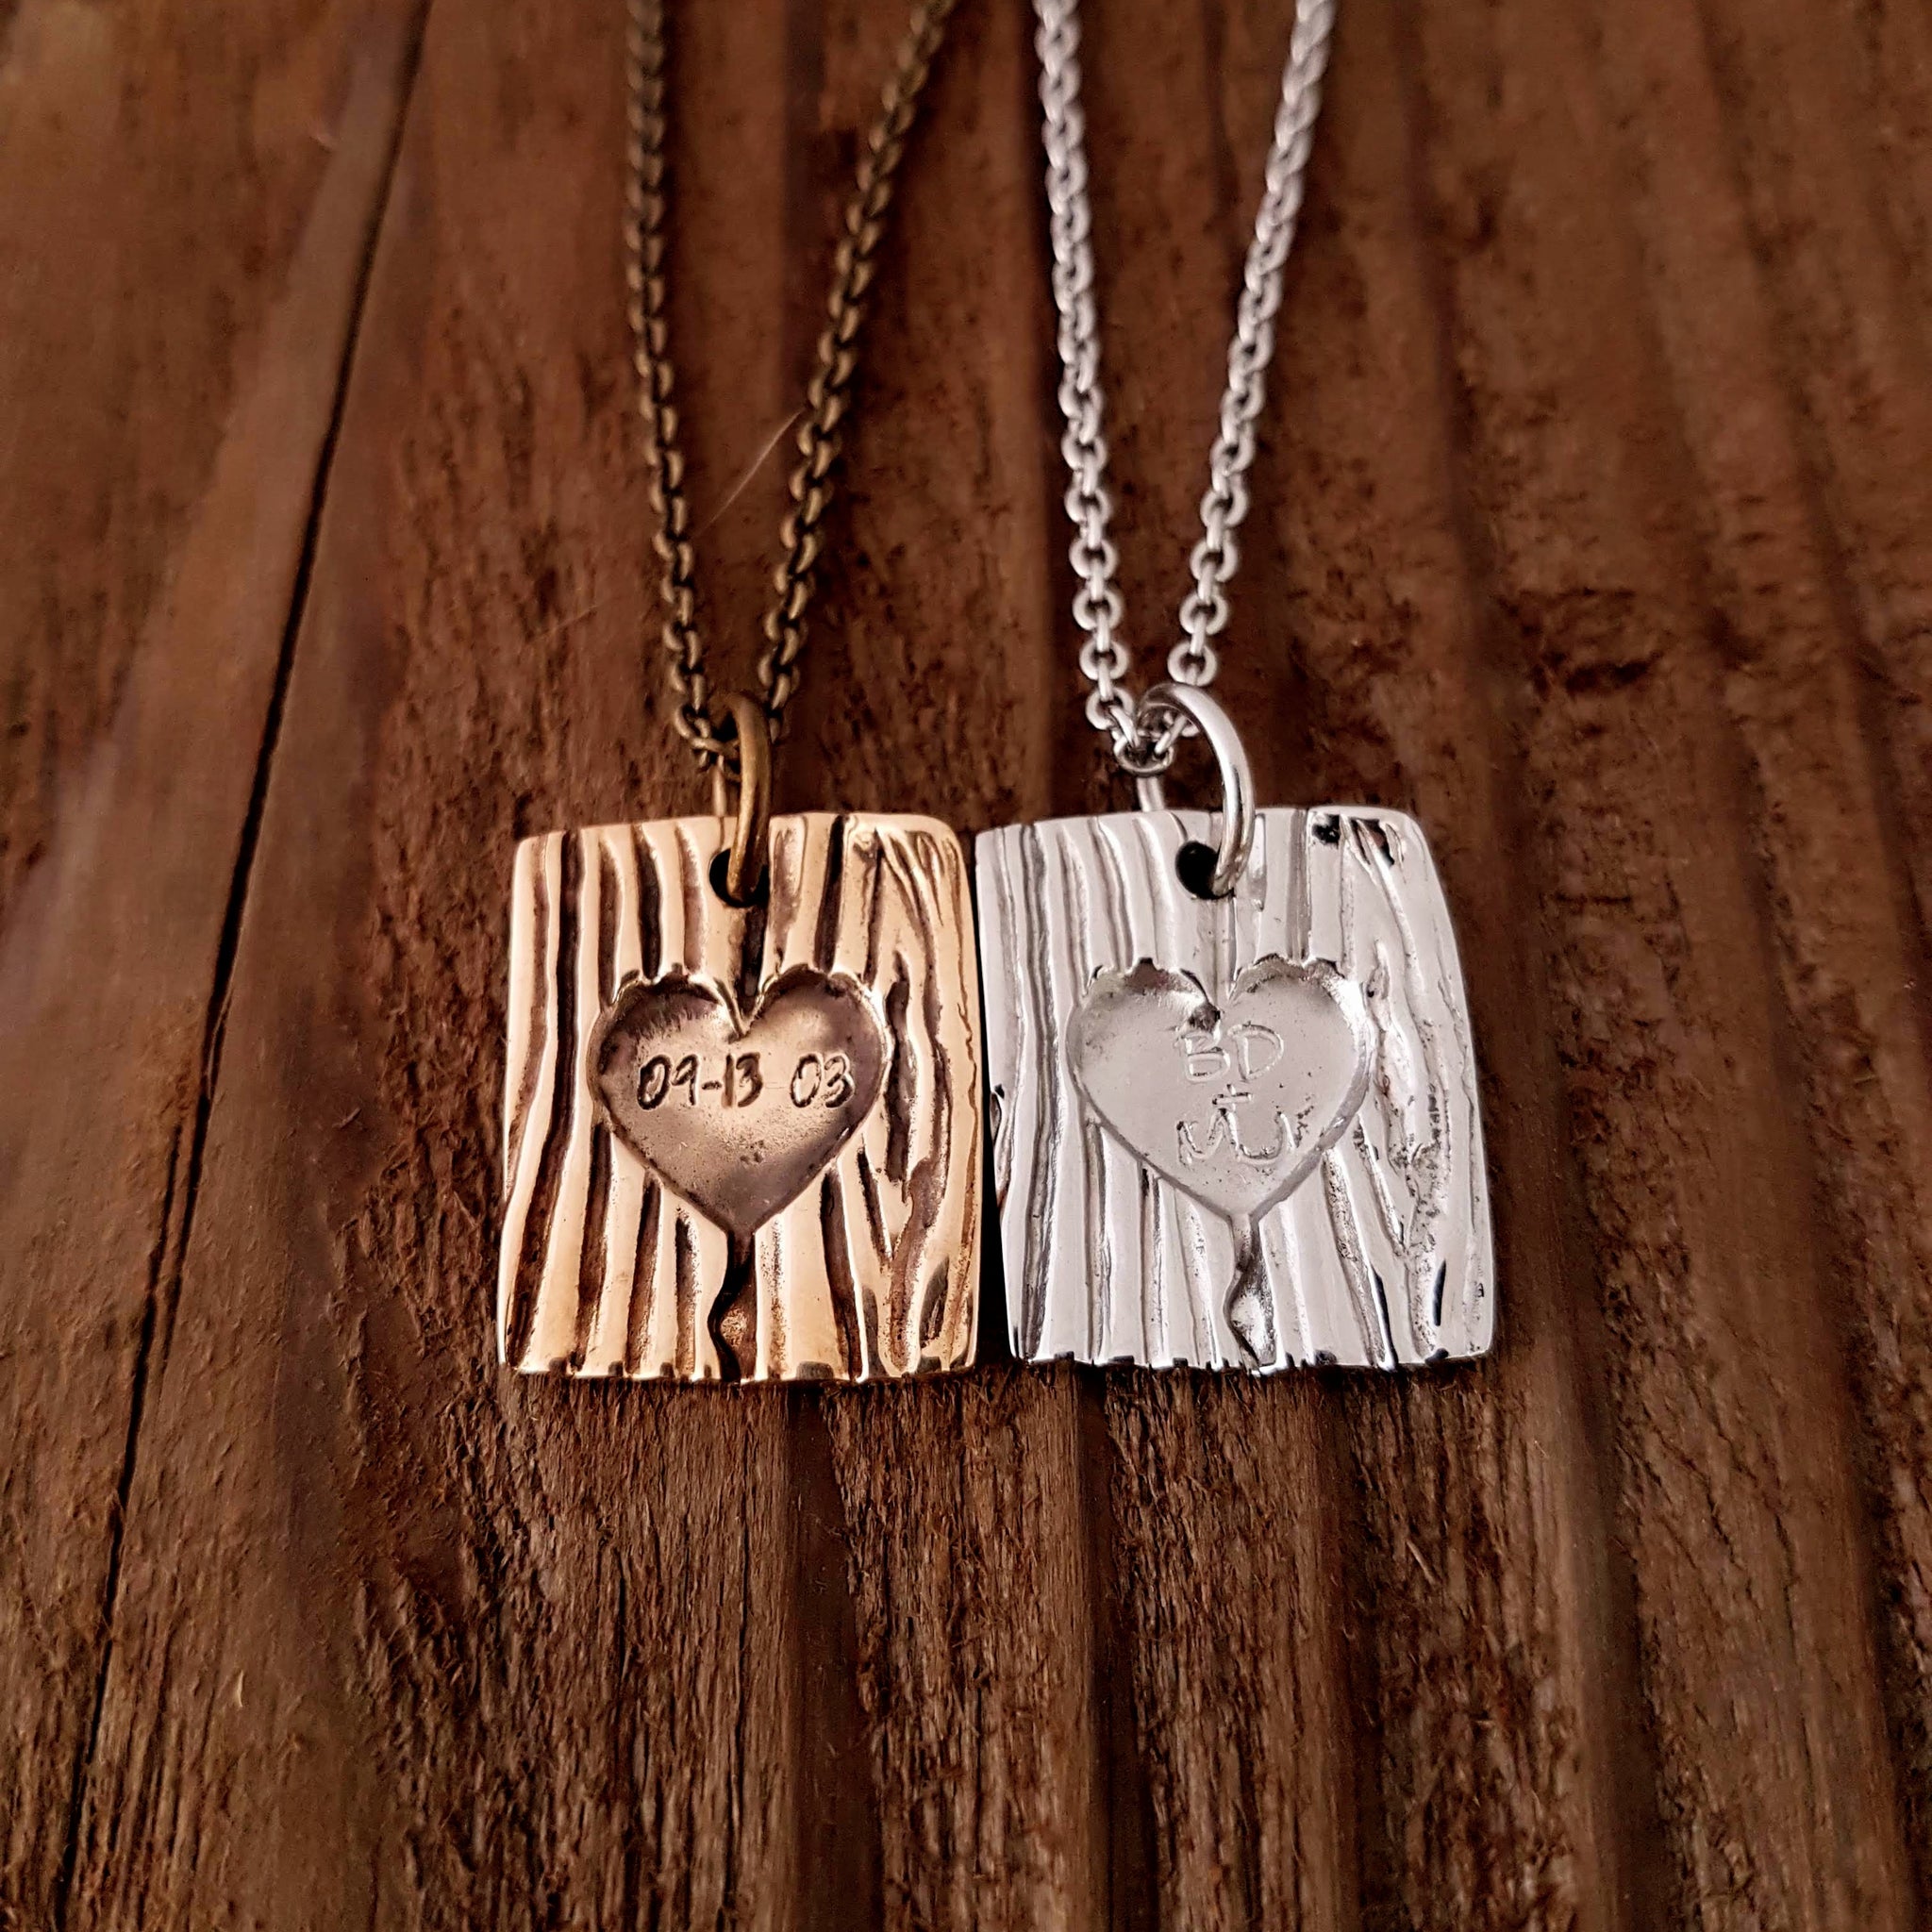 Carved Initial Tree Bark Necklace - Gwen Delicious Jewelry Designs